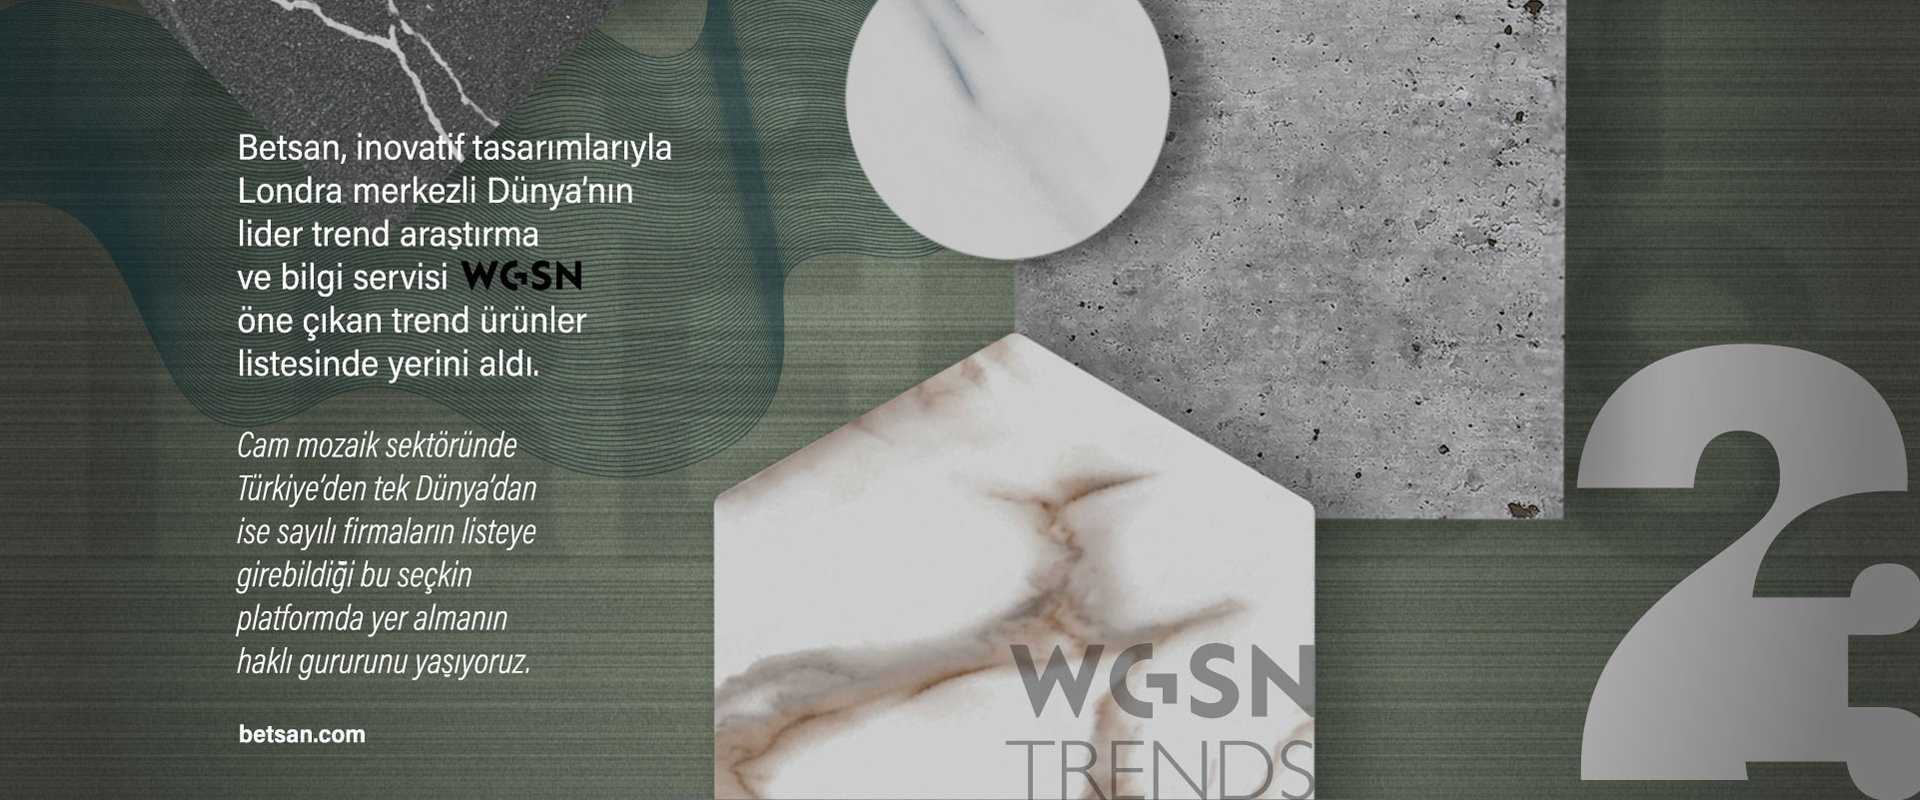 Betsan, was included  in the list of trend  products with leading trend research and information service WGSN.